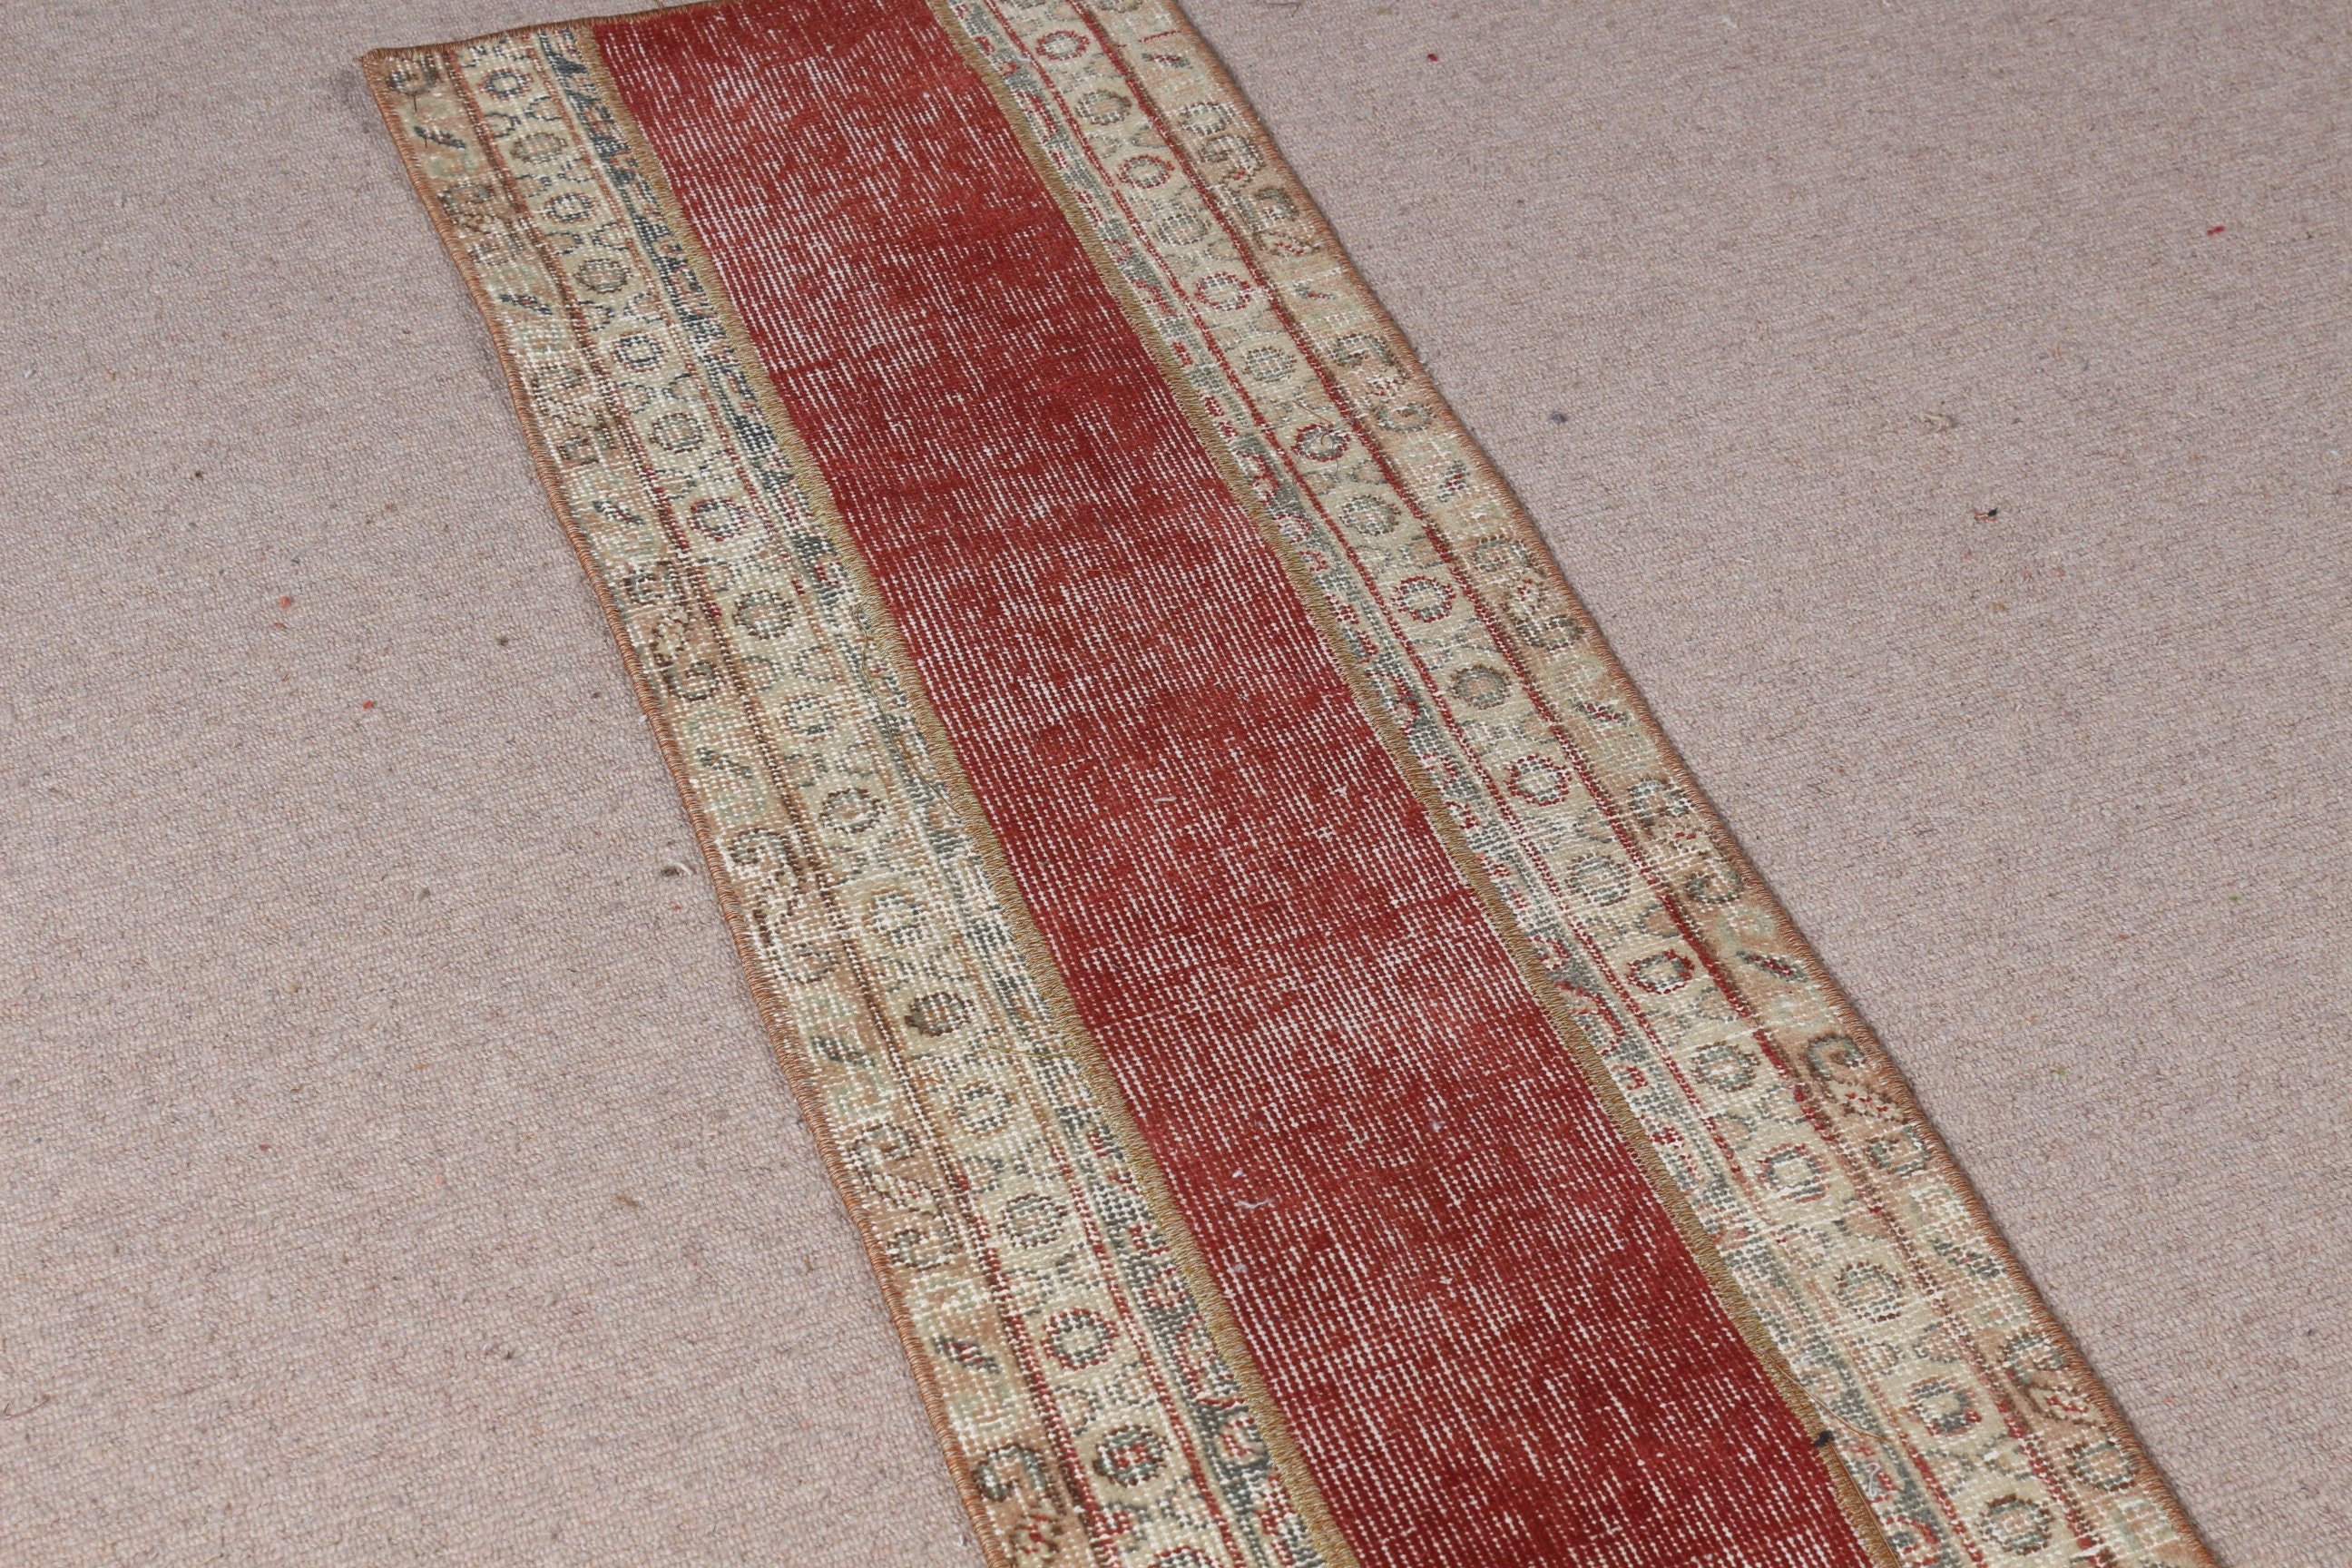 Red Moroccan Rug, Entry Rug, Kitchen Rug, Oriental Rugs, Rugs for Car Mat, 1.3x4 ft Small Rug, Vintage Rug, Turkish Rug